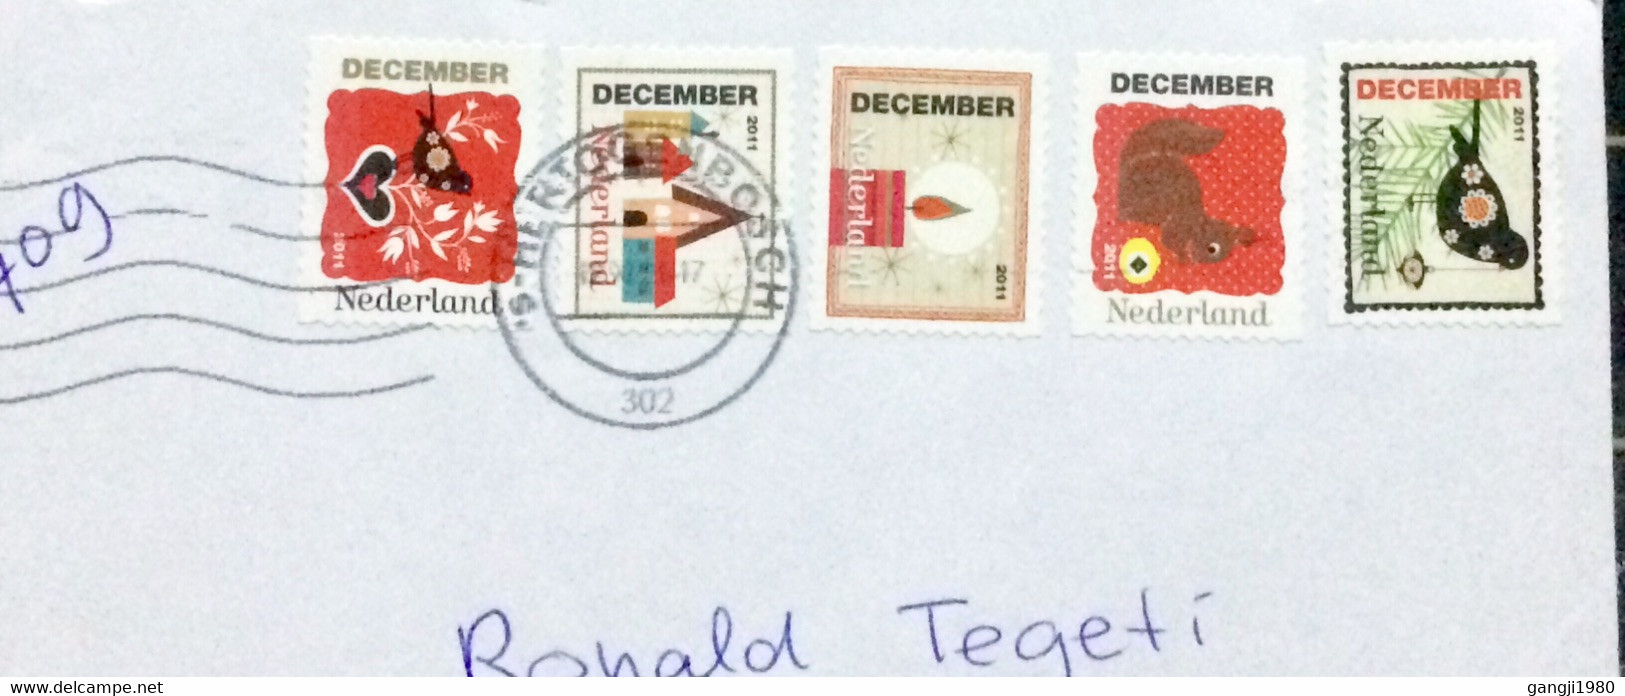 NEDERLAND 2011, COVER USED TO USA, DECEMBER 2011  DIFF  5 STAMP, BIRD, SQUIRREL, HOME, ROTTENBOSCH CITY CANCEL. - Storia Postale